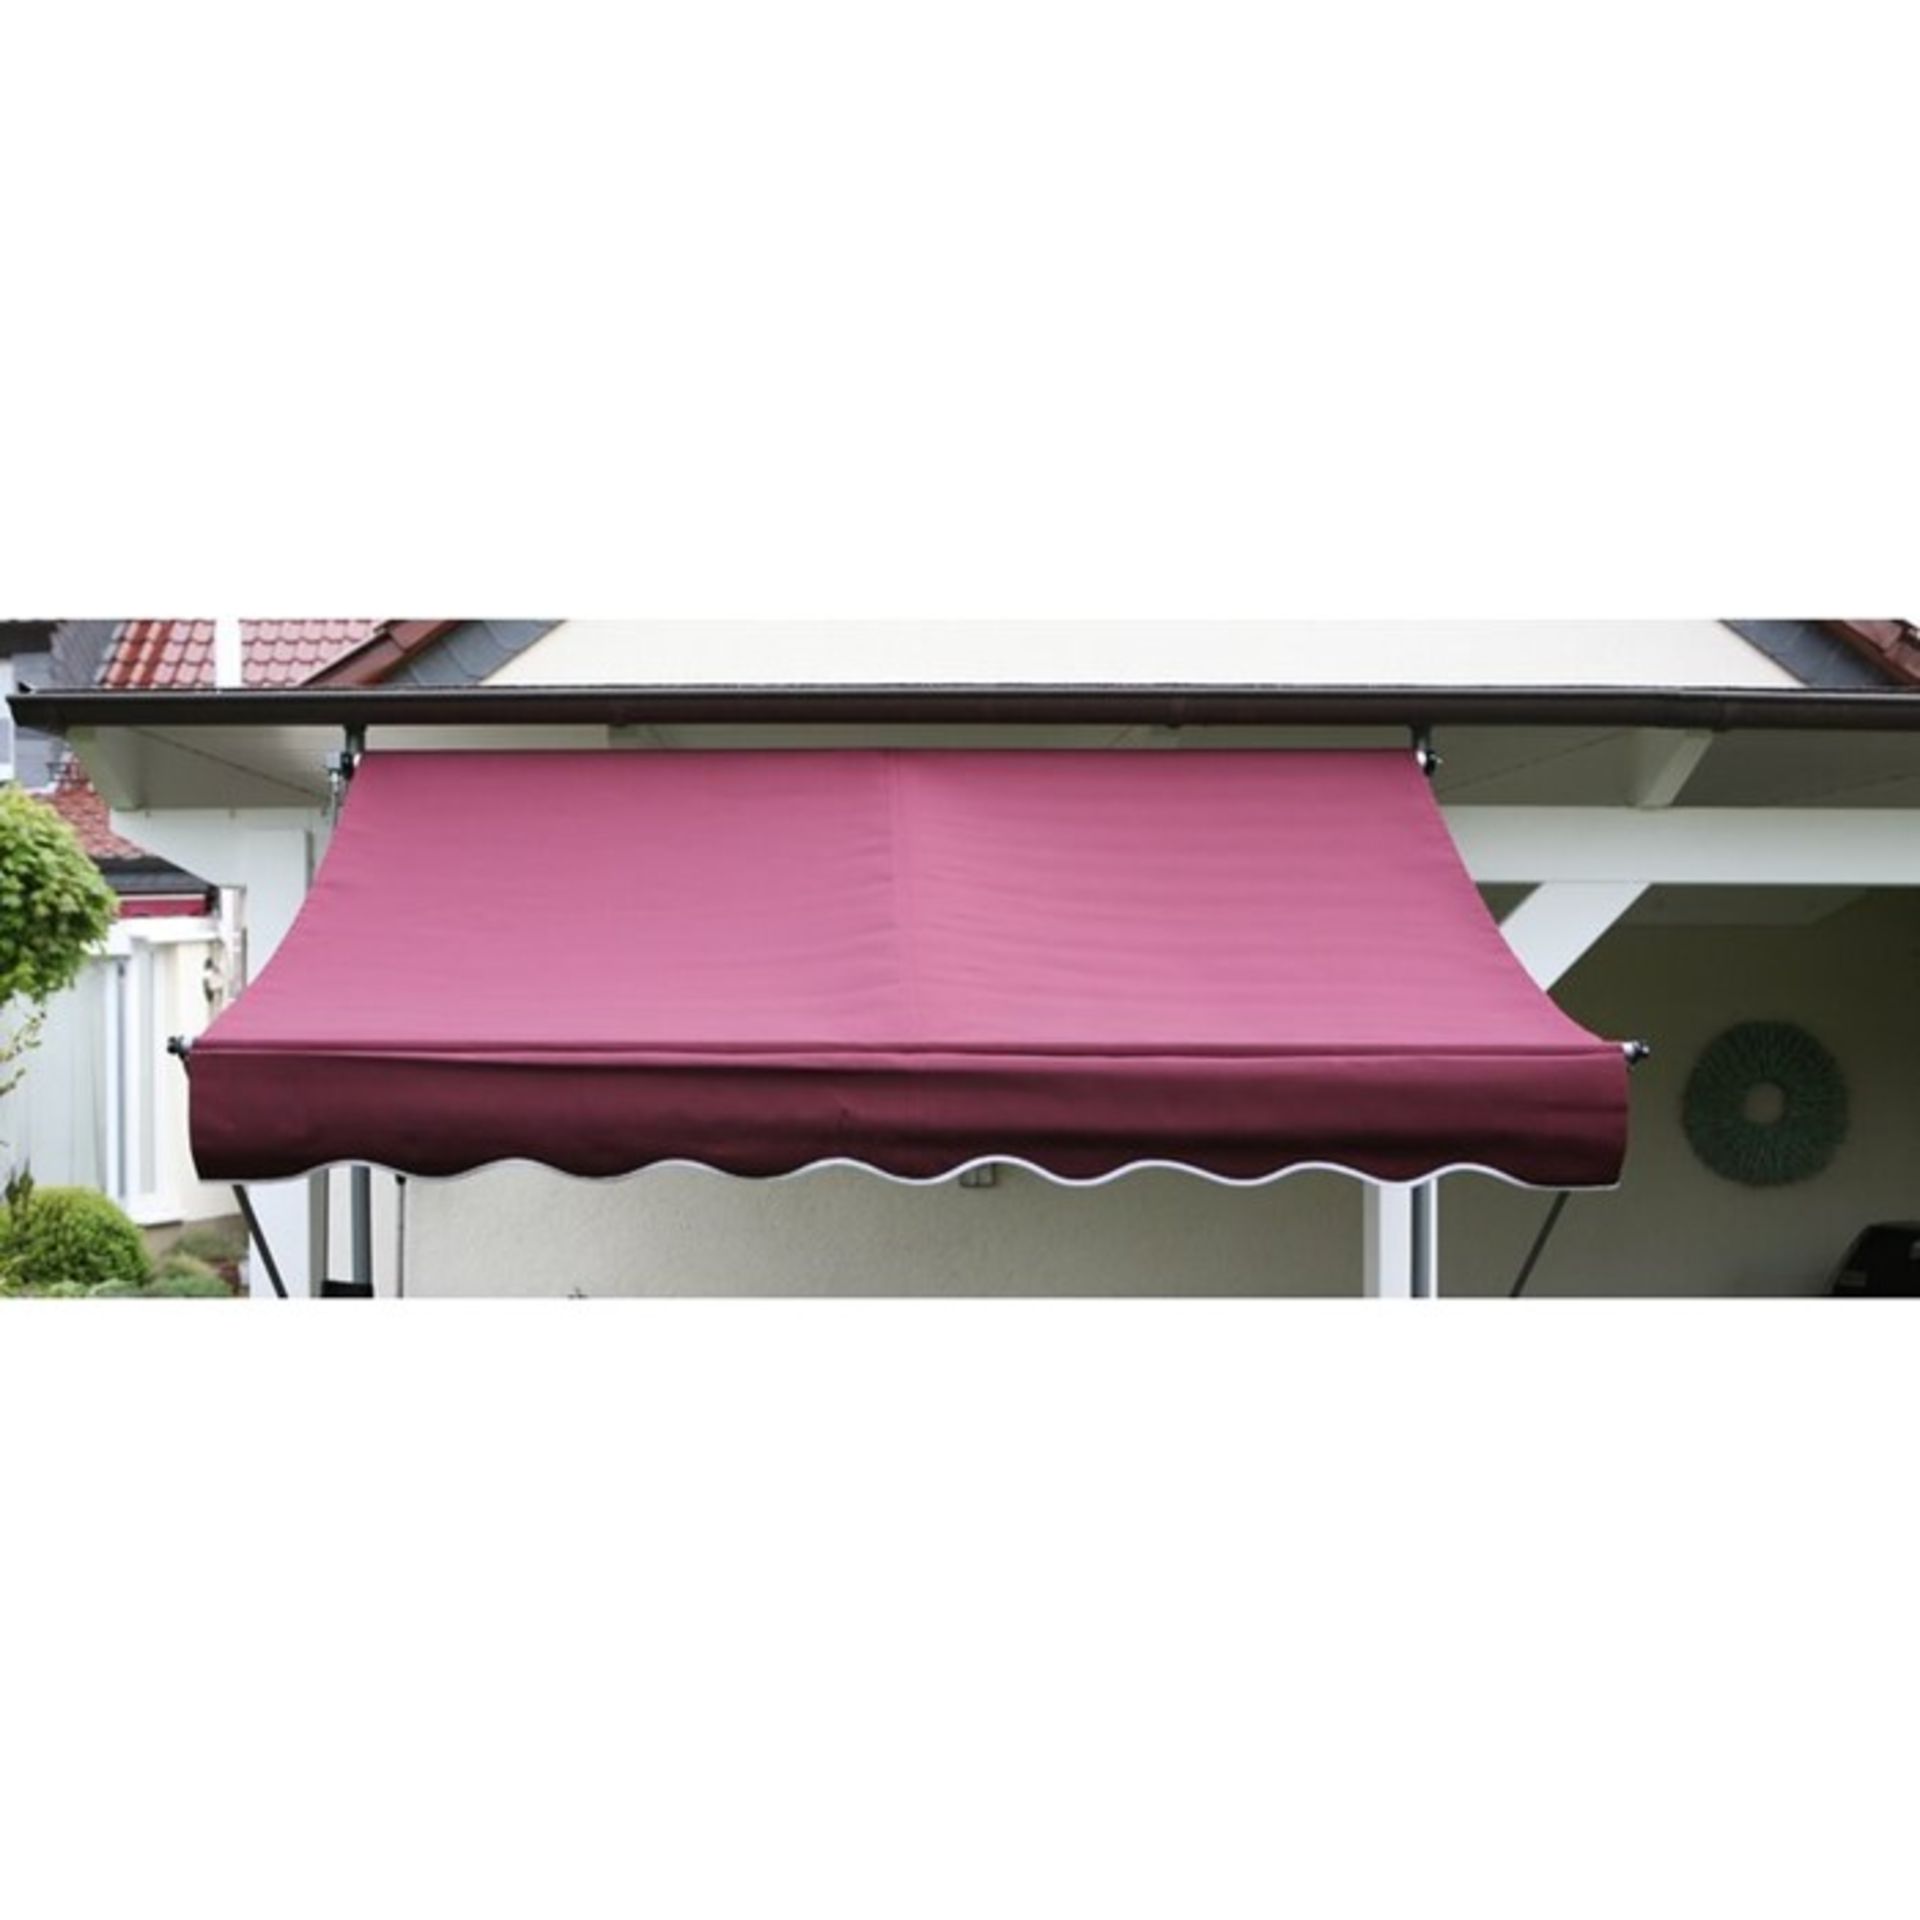 Sol 72 Outdoor,Holler 2.5m W x 1.5m D Retractable Patio Awning RRP -£229.99 (21766/2 -HBXZ1015) (